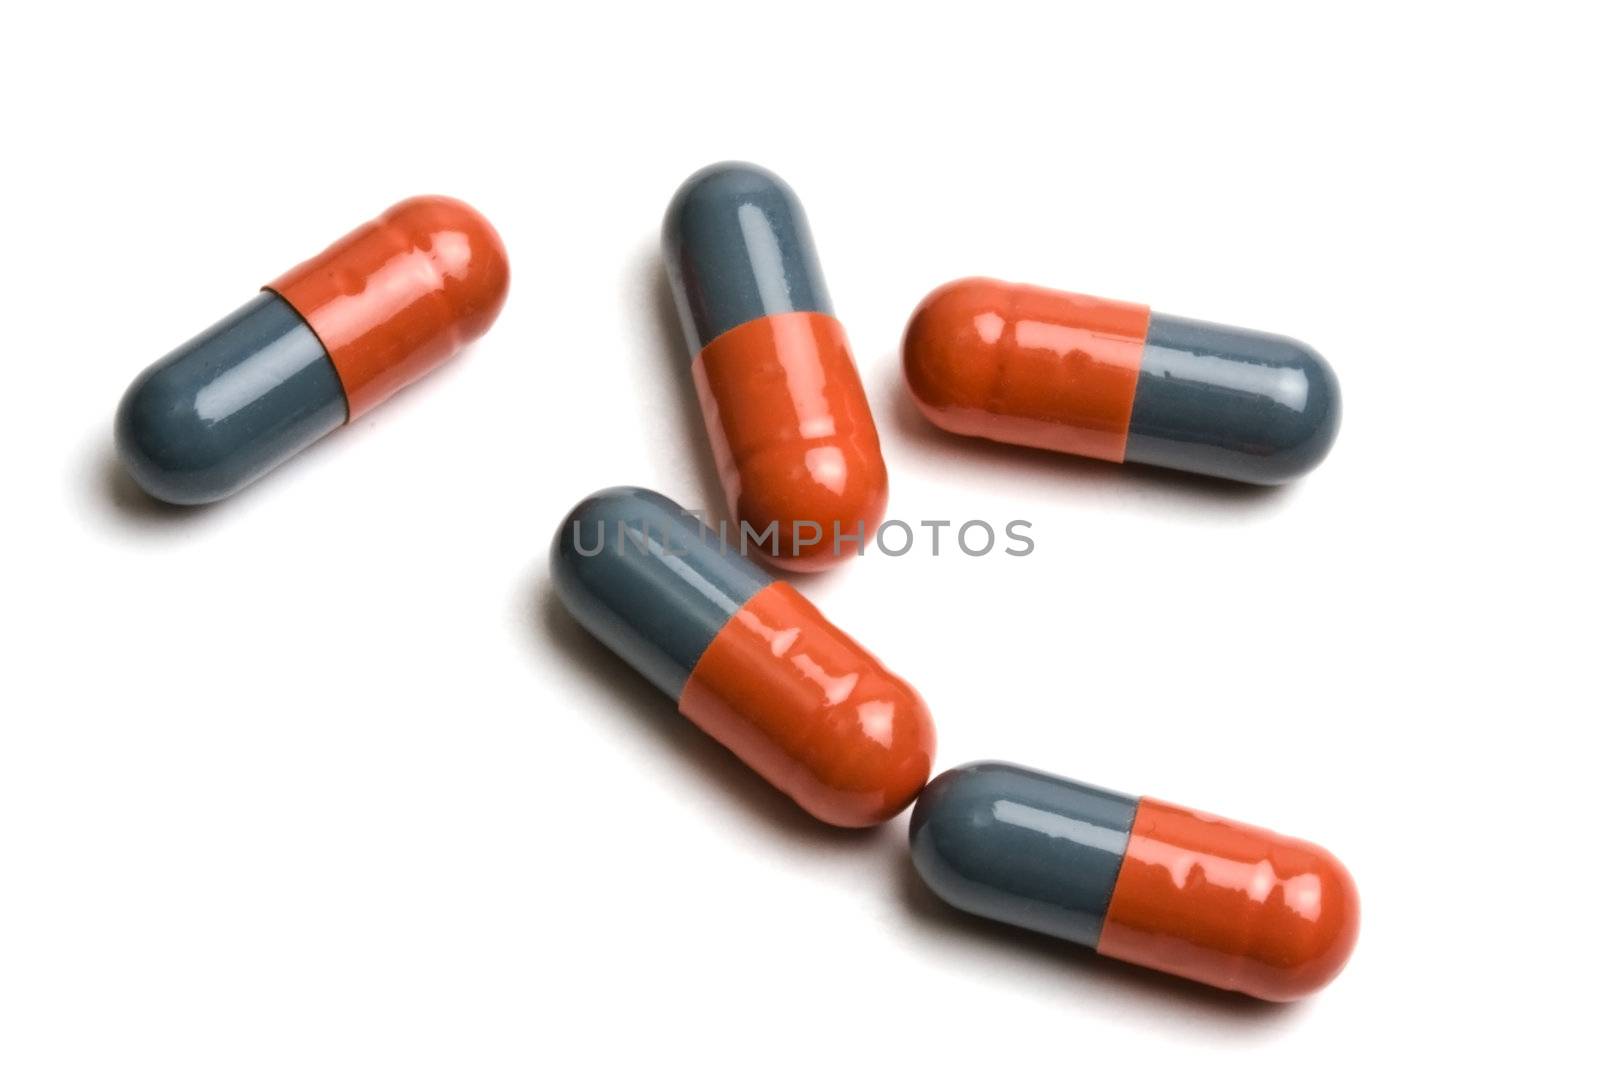 Capsules by ibphoto